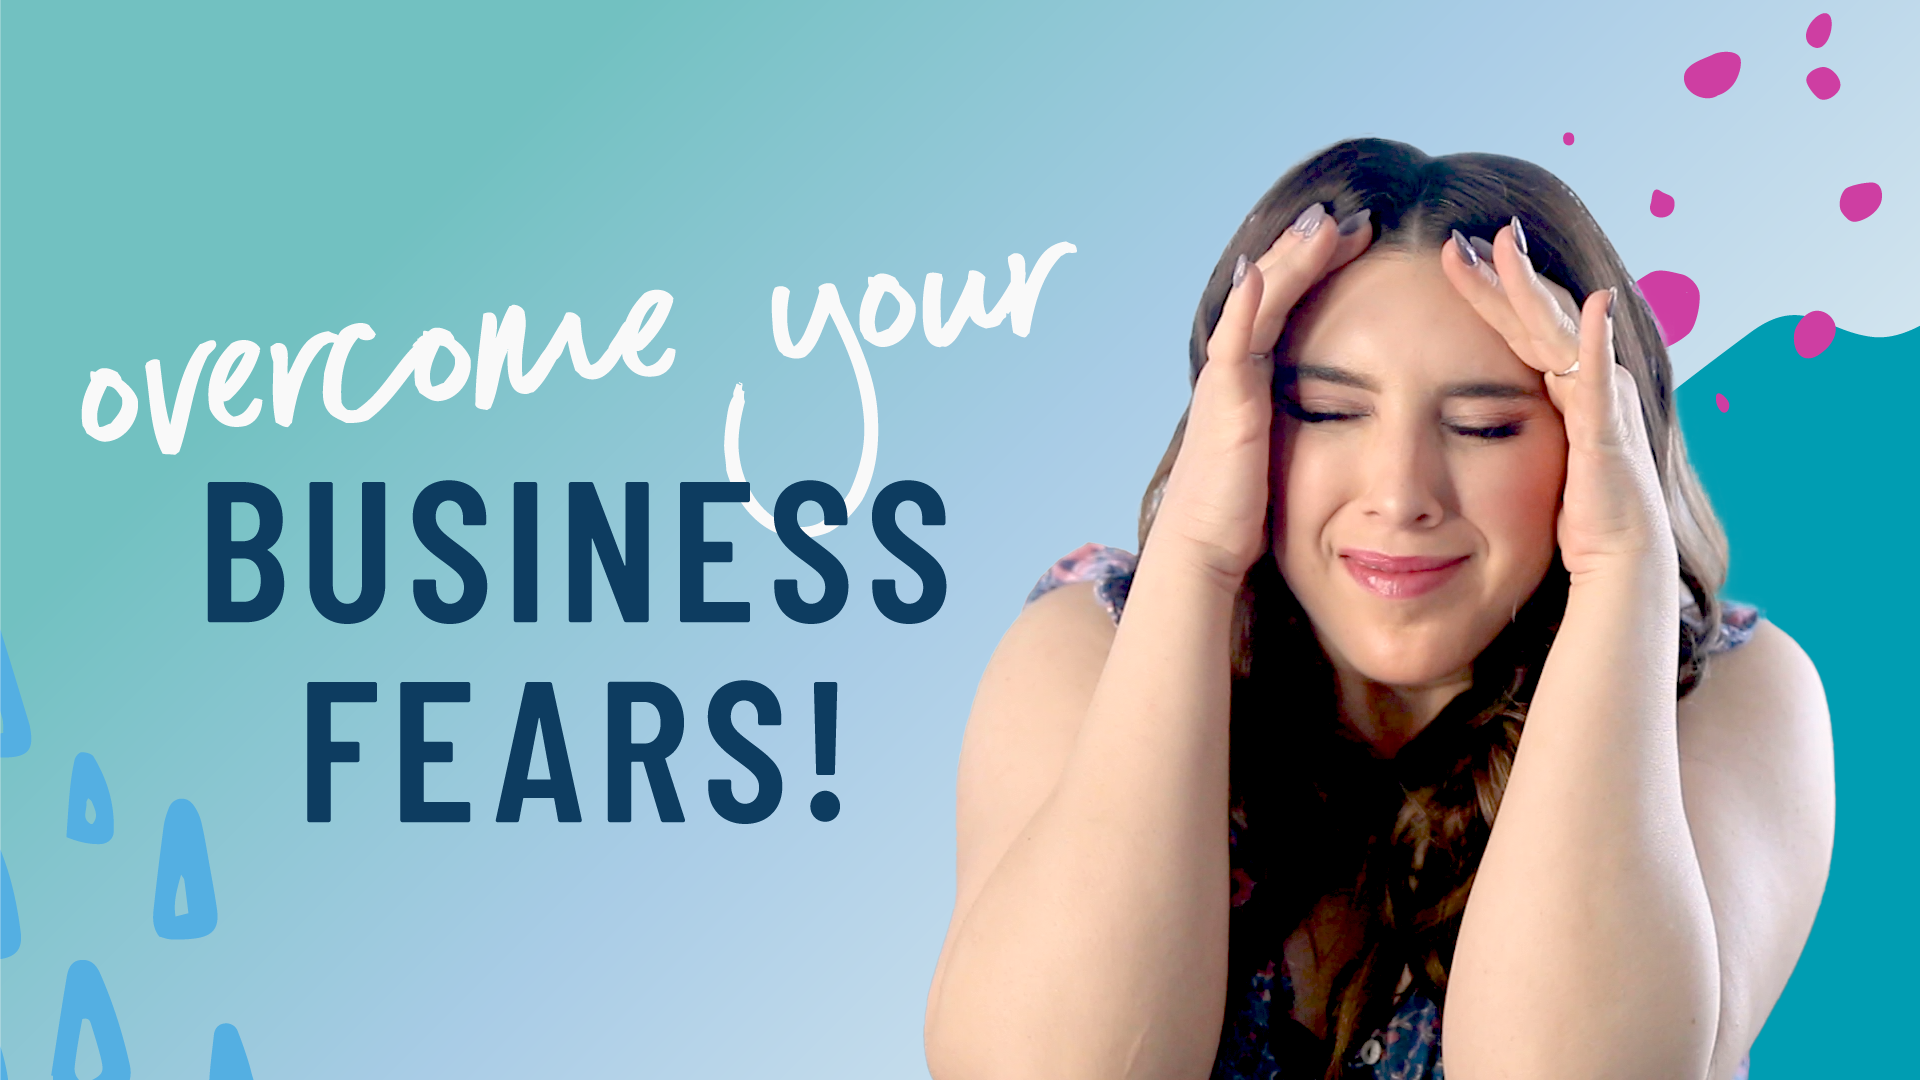 Overcome your business fears